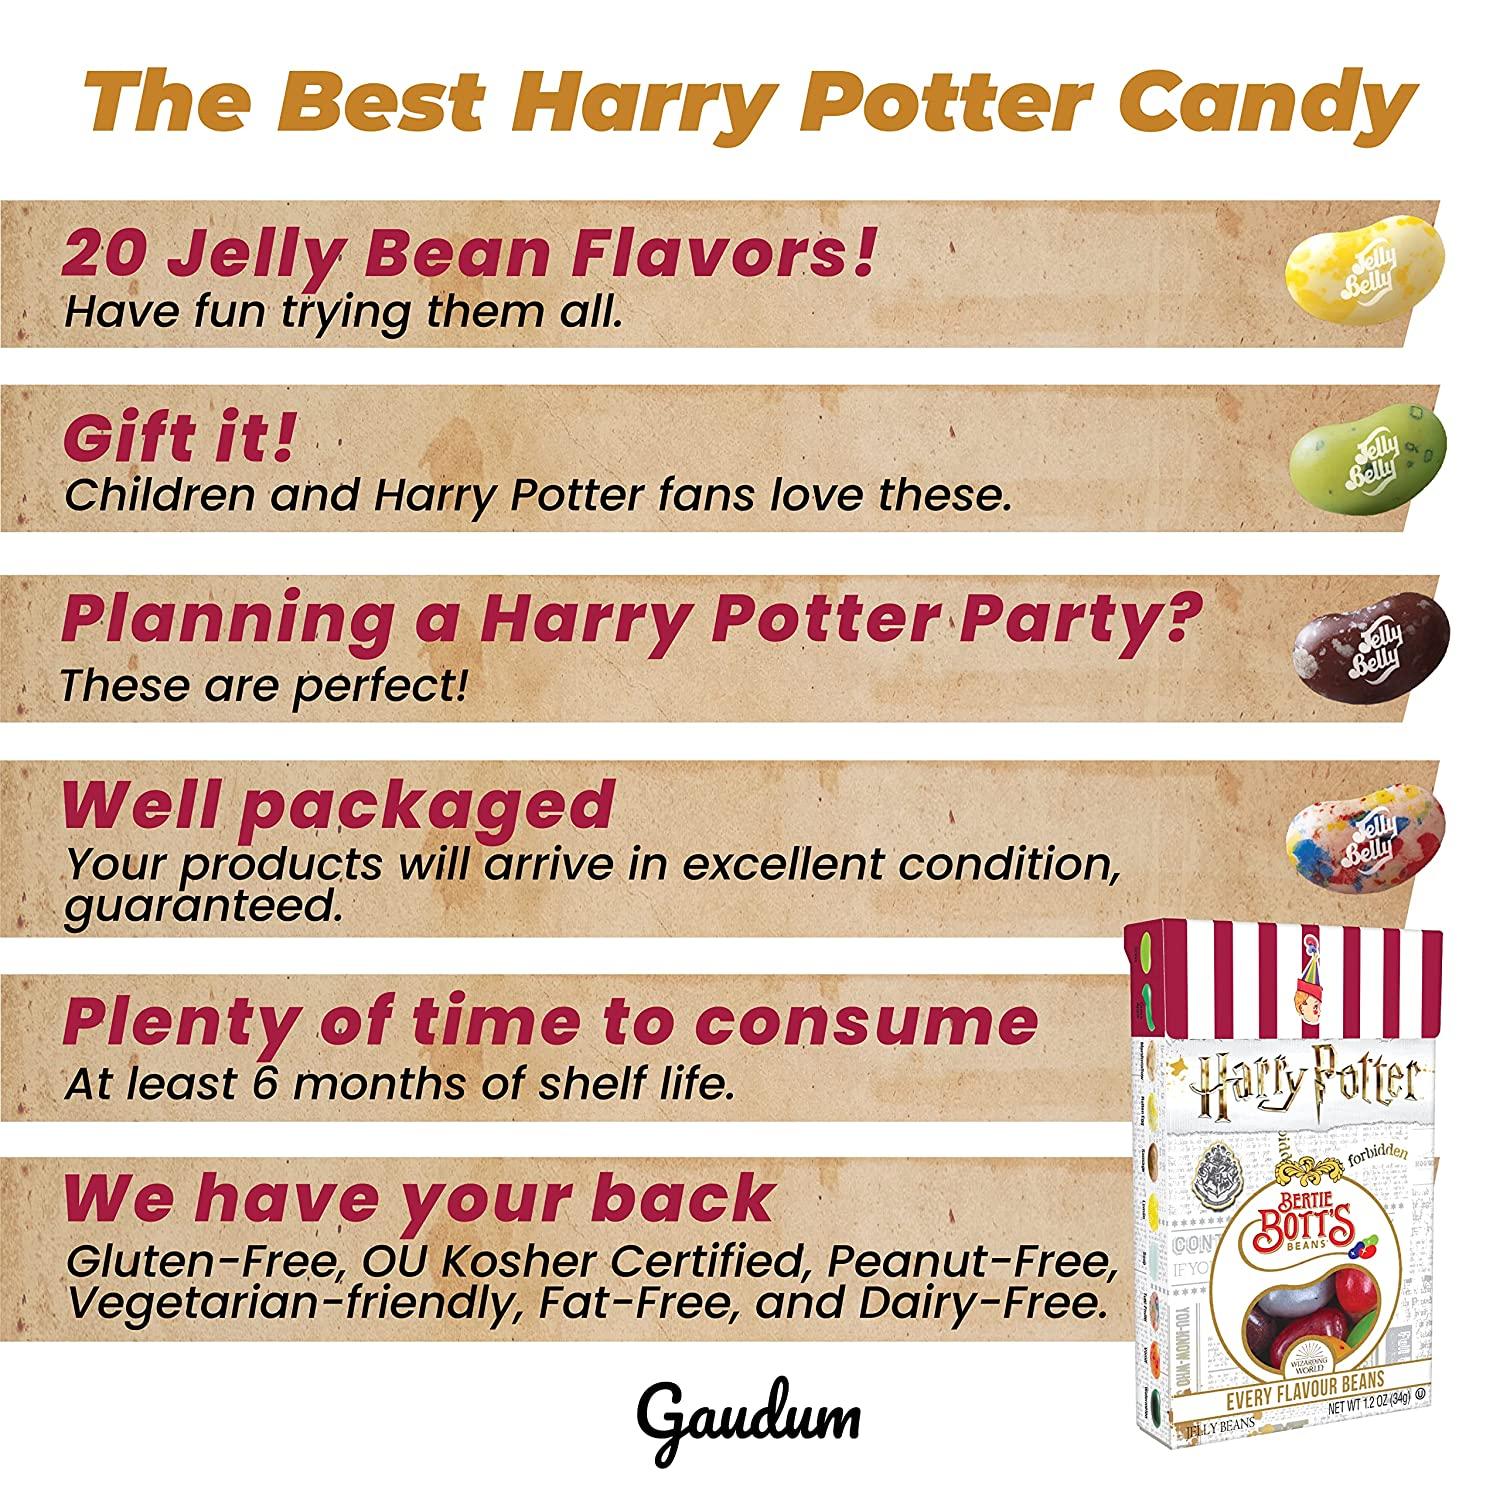 Jelly Belly Harry Potter Jelly Beans - Harry Potter Candy - 1.2 oz. Bertie  Botts Every Flavored Beans (4 ct) + Gaudum Bertie Botts Jelly Bean rating  cards (6 ct) Small Bundle